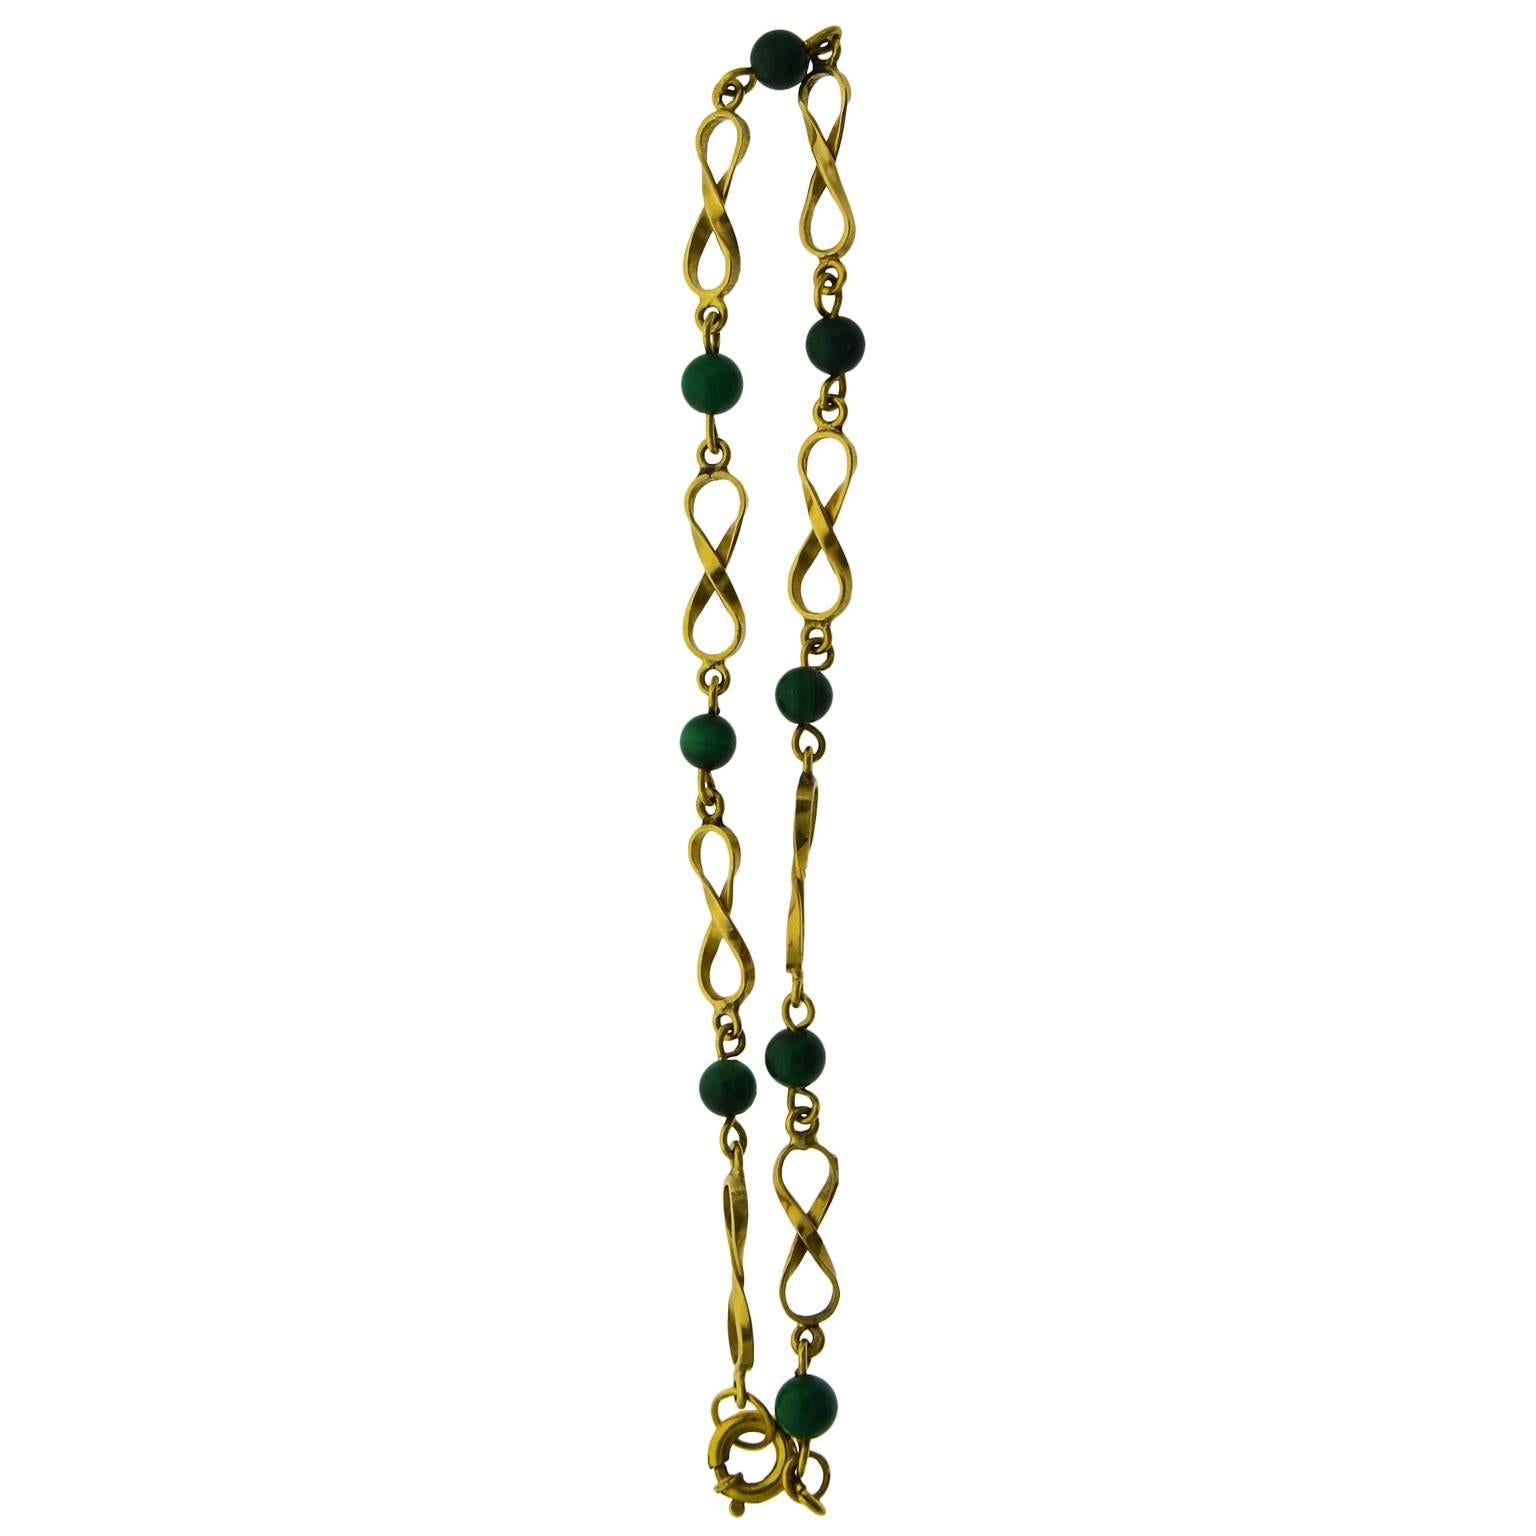 Art Deco Solid Gold Hand Constructed Link Bracelet with Malachite Beads